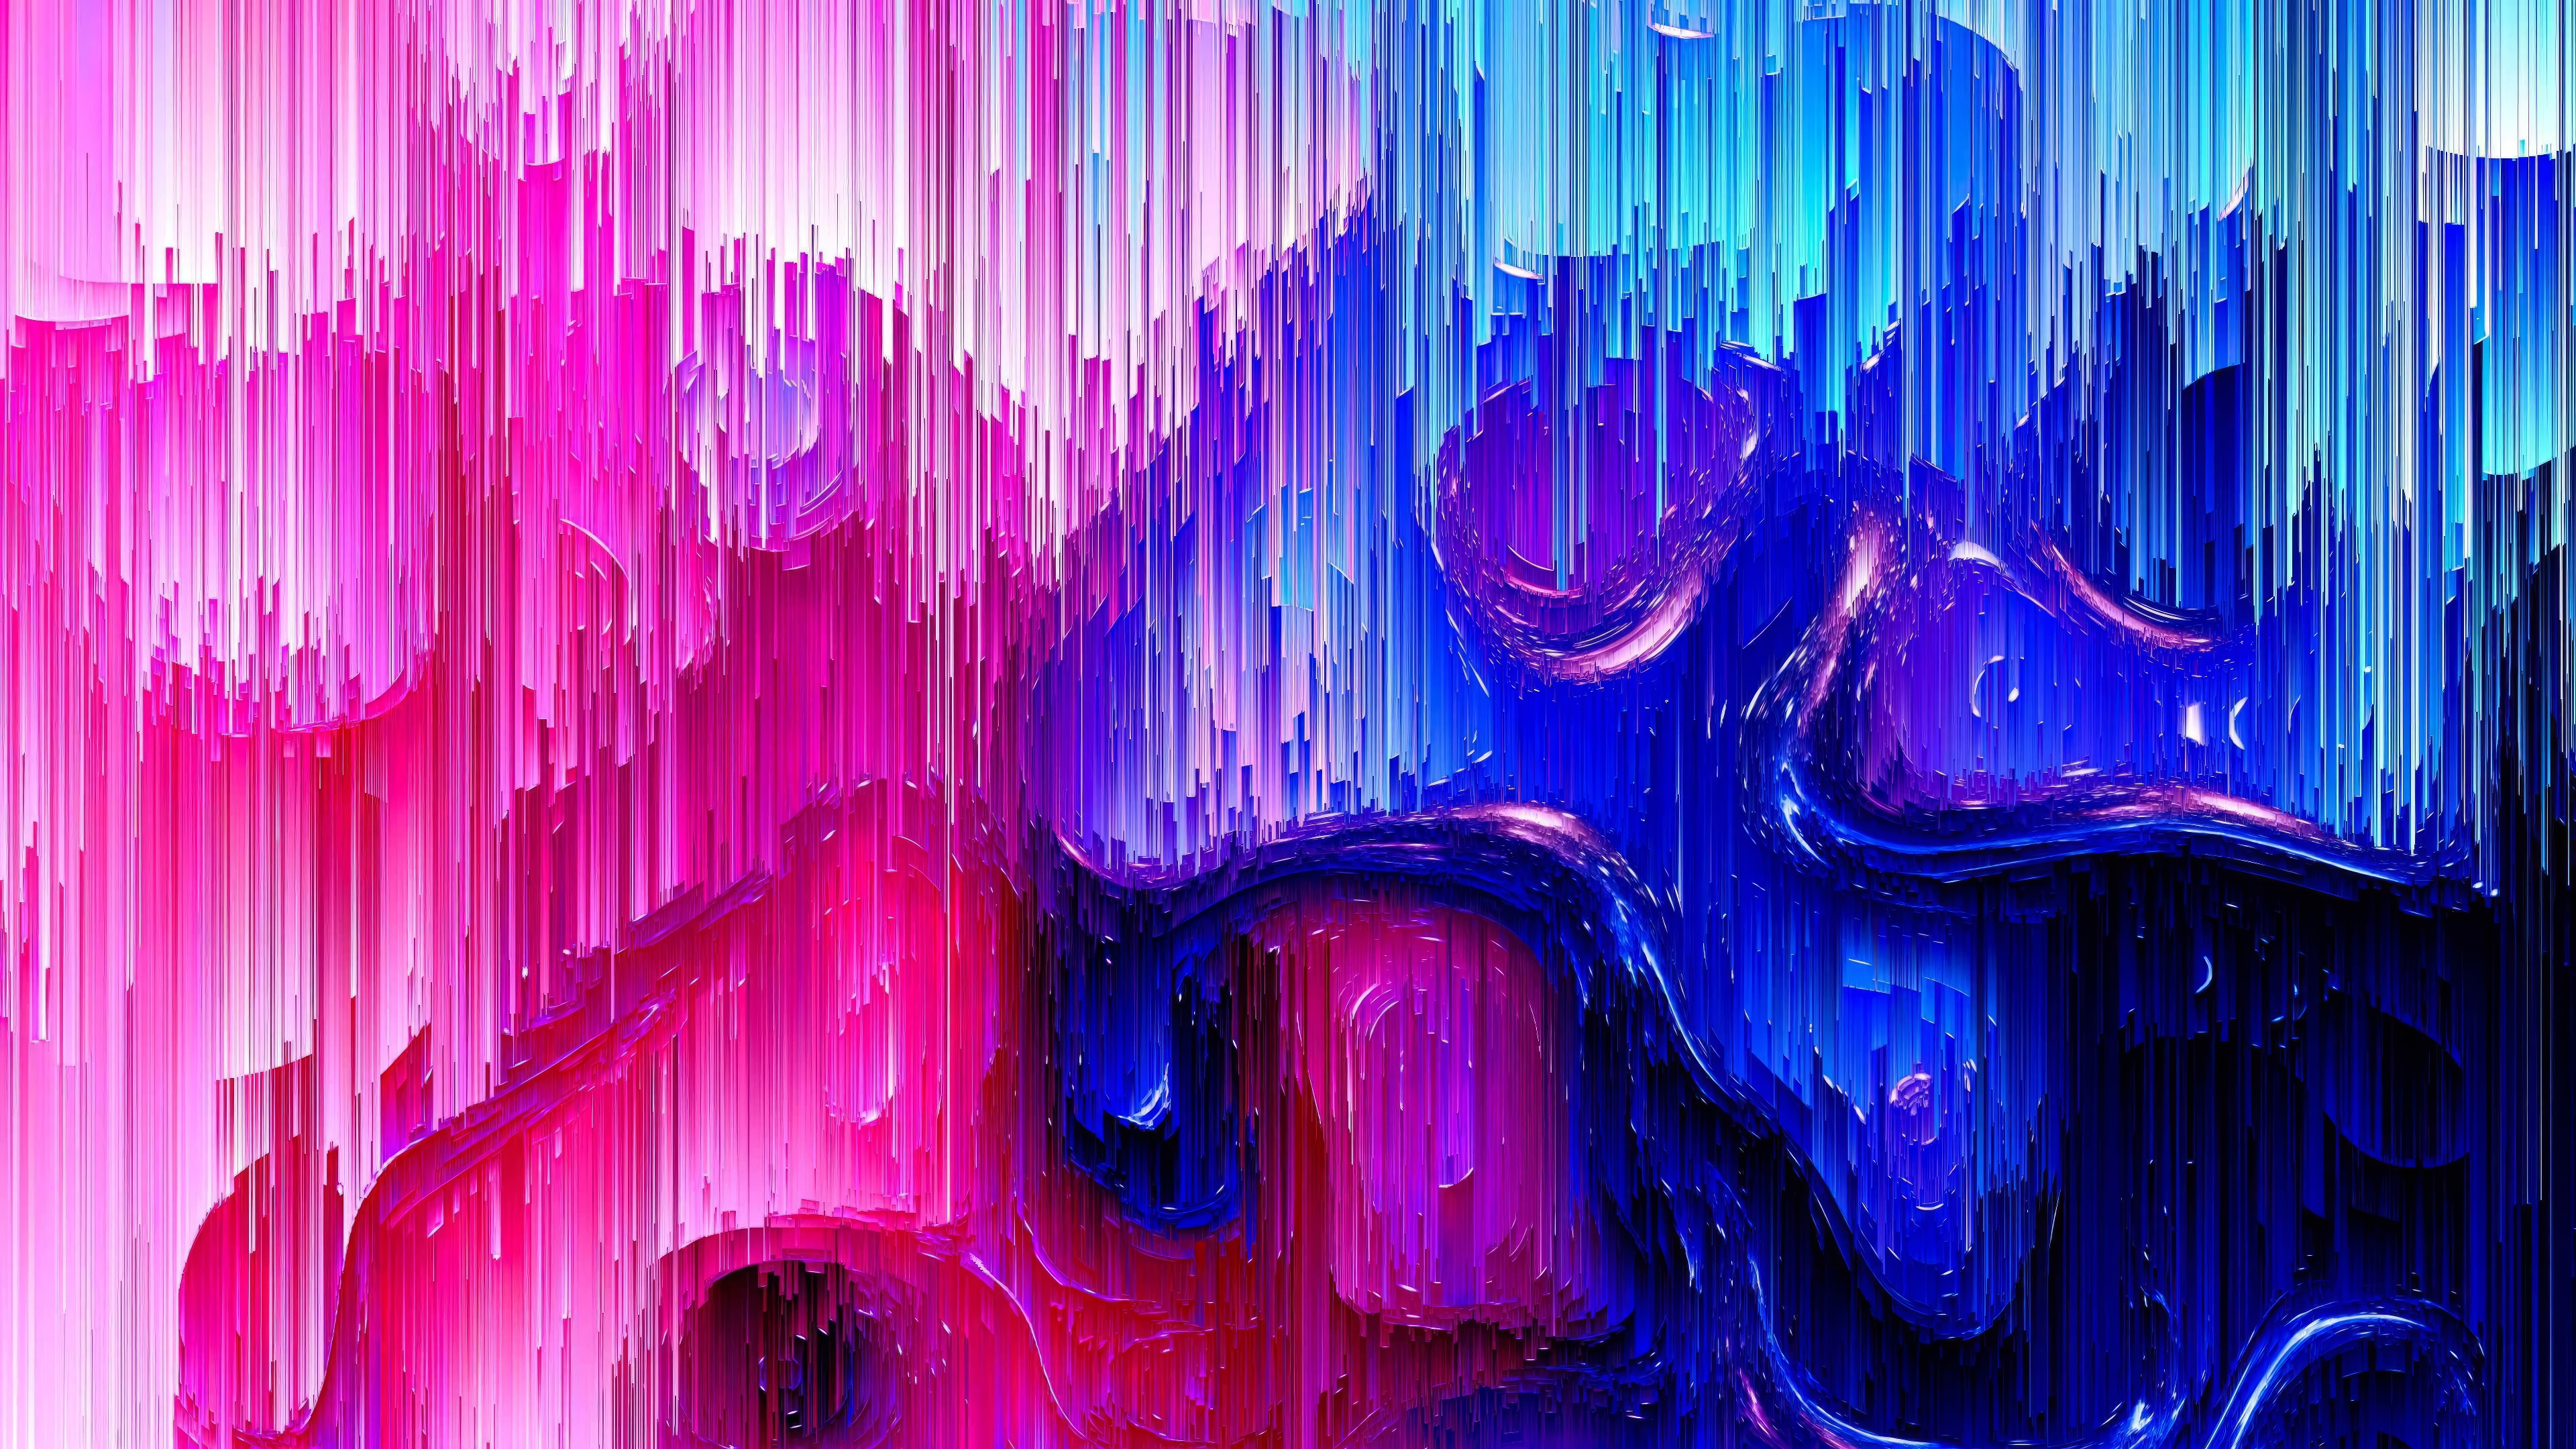 General 3840x2160 abstract glitch art vibrant pink blue vertical lines pixelated